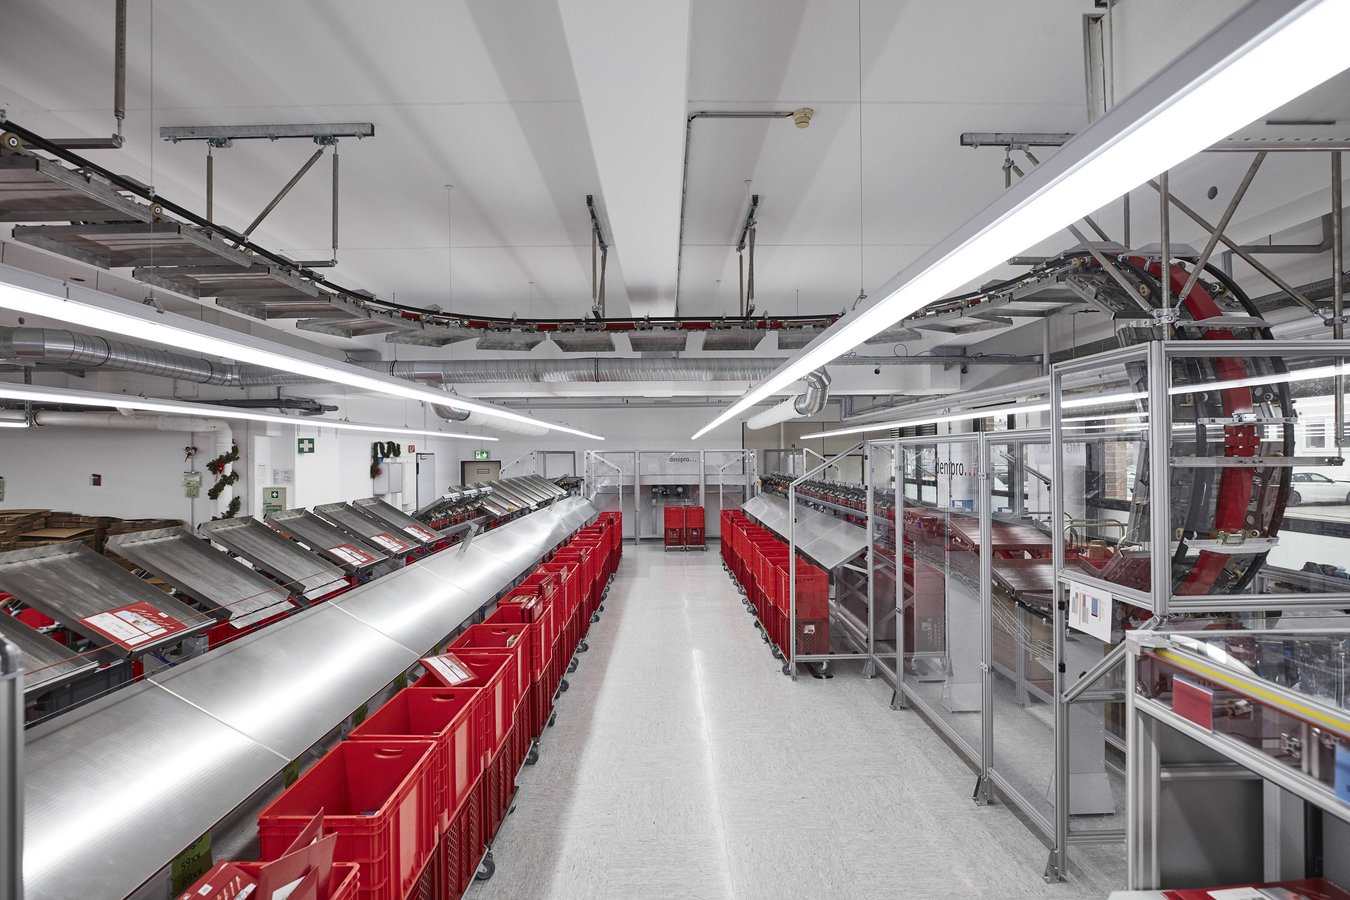 Swiss precision enables a highly-efficient sorting process